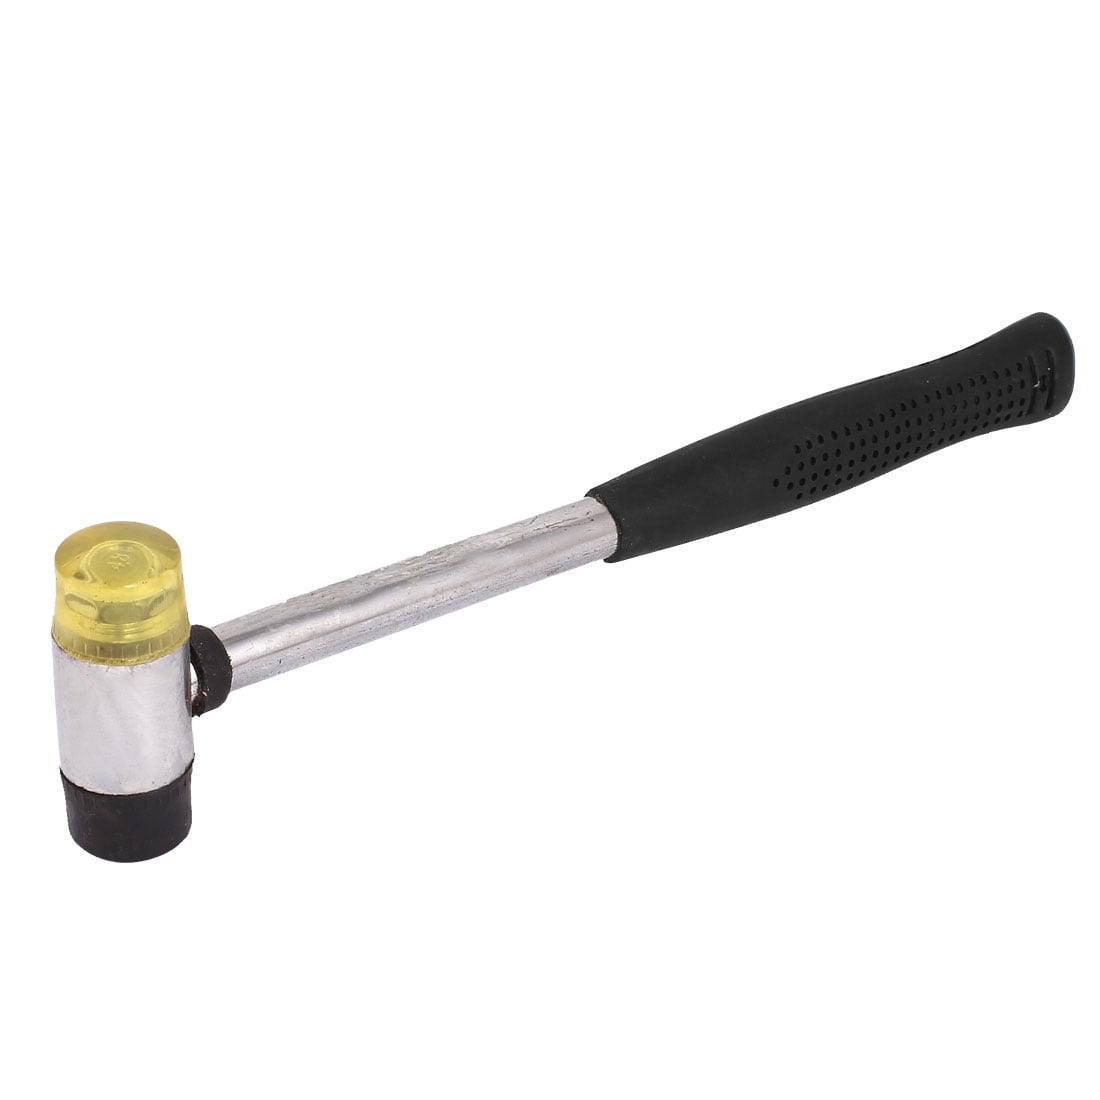 Performance Tool® W1154 - 8 oz. Rubber Mallet